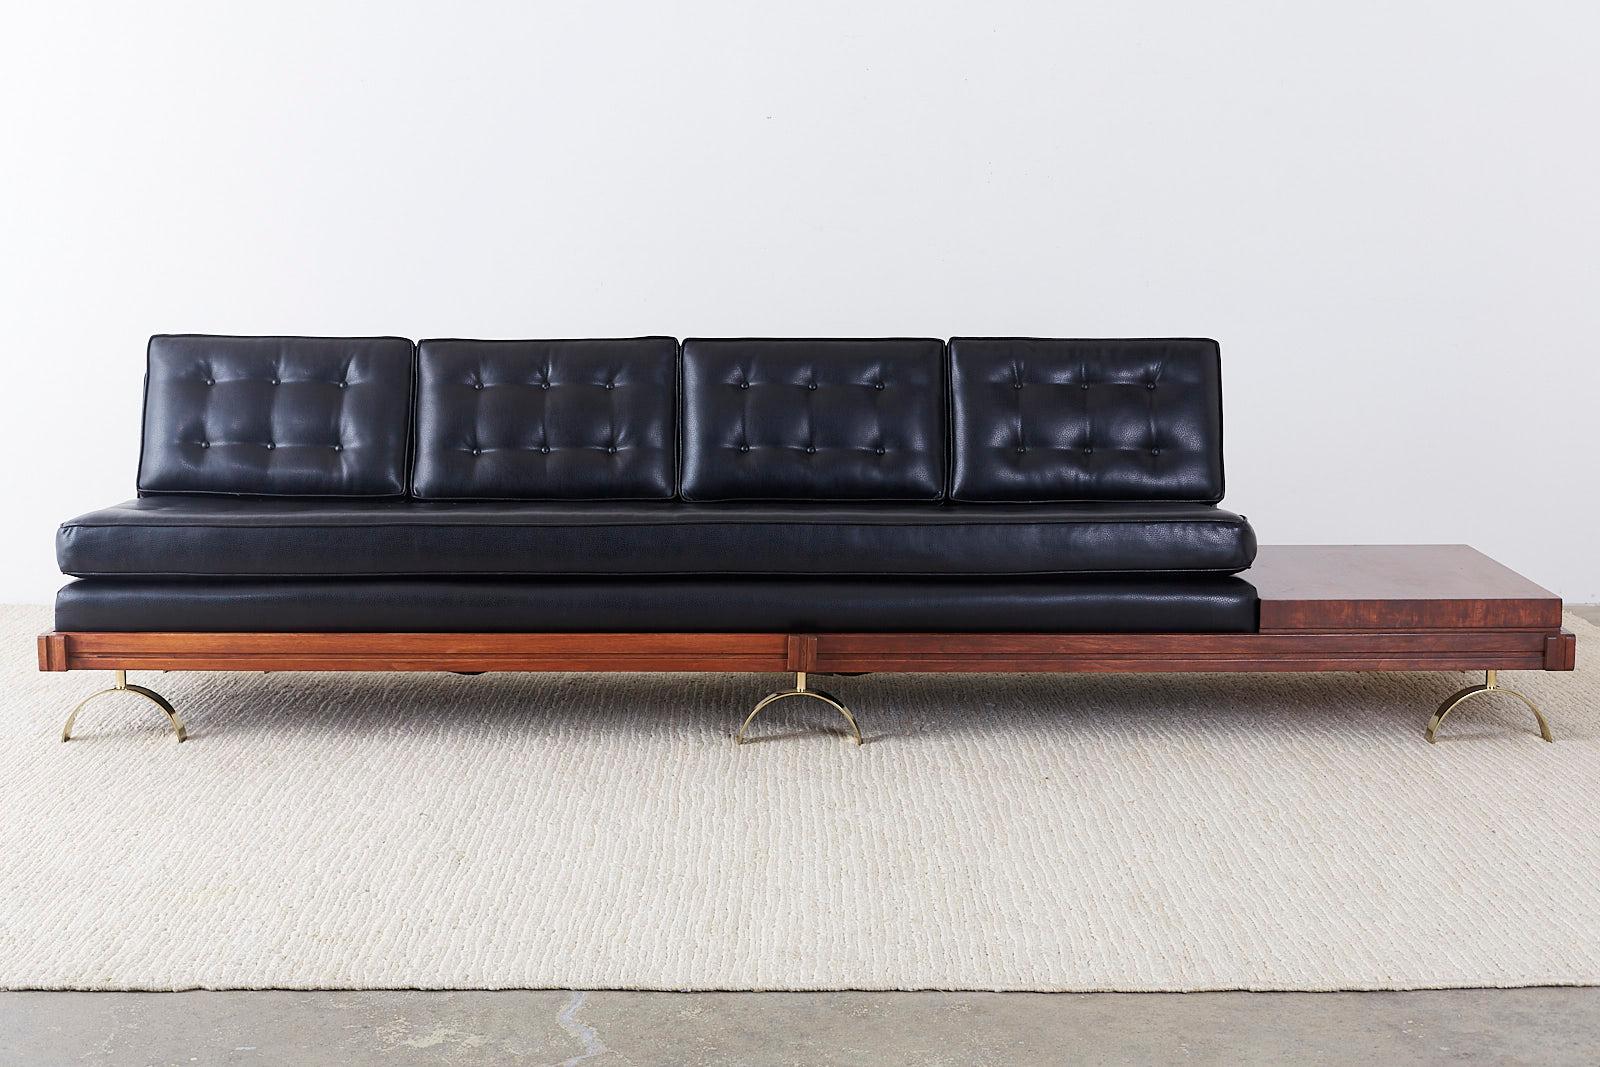 Marvelous Mid-Century Modern Challenge series gondola sofa designed by Martin Borenstein. Features a tufted black leather upholstery inset in a walnut frame with attached side table. The seating area is 96 inches wide and is supported by six